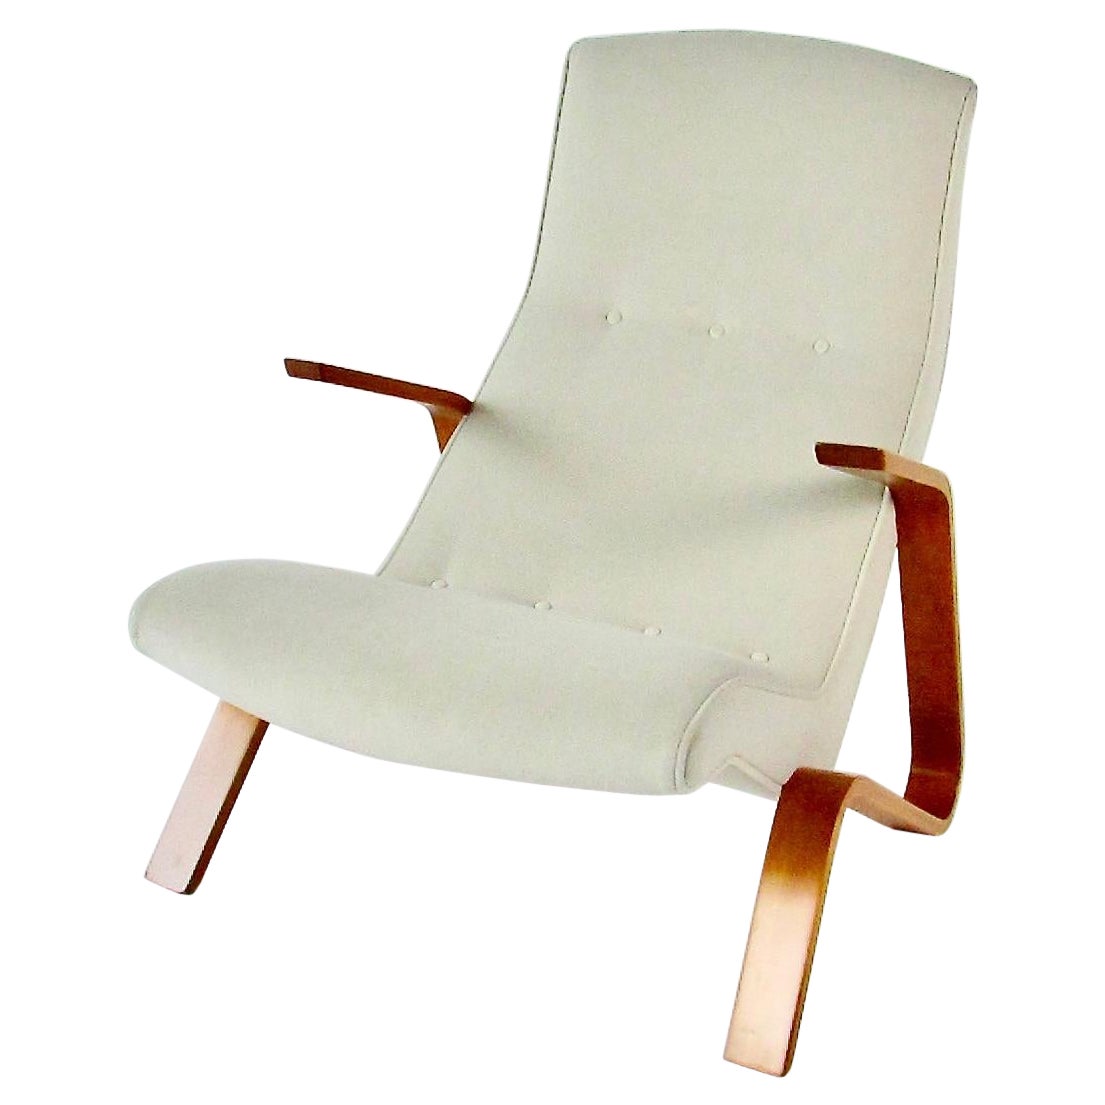 Properly Restored Early Production Eero Saarinen Grasshopper Chair for Knoll